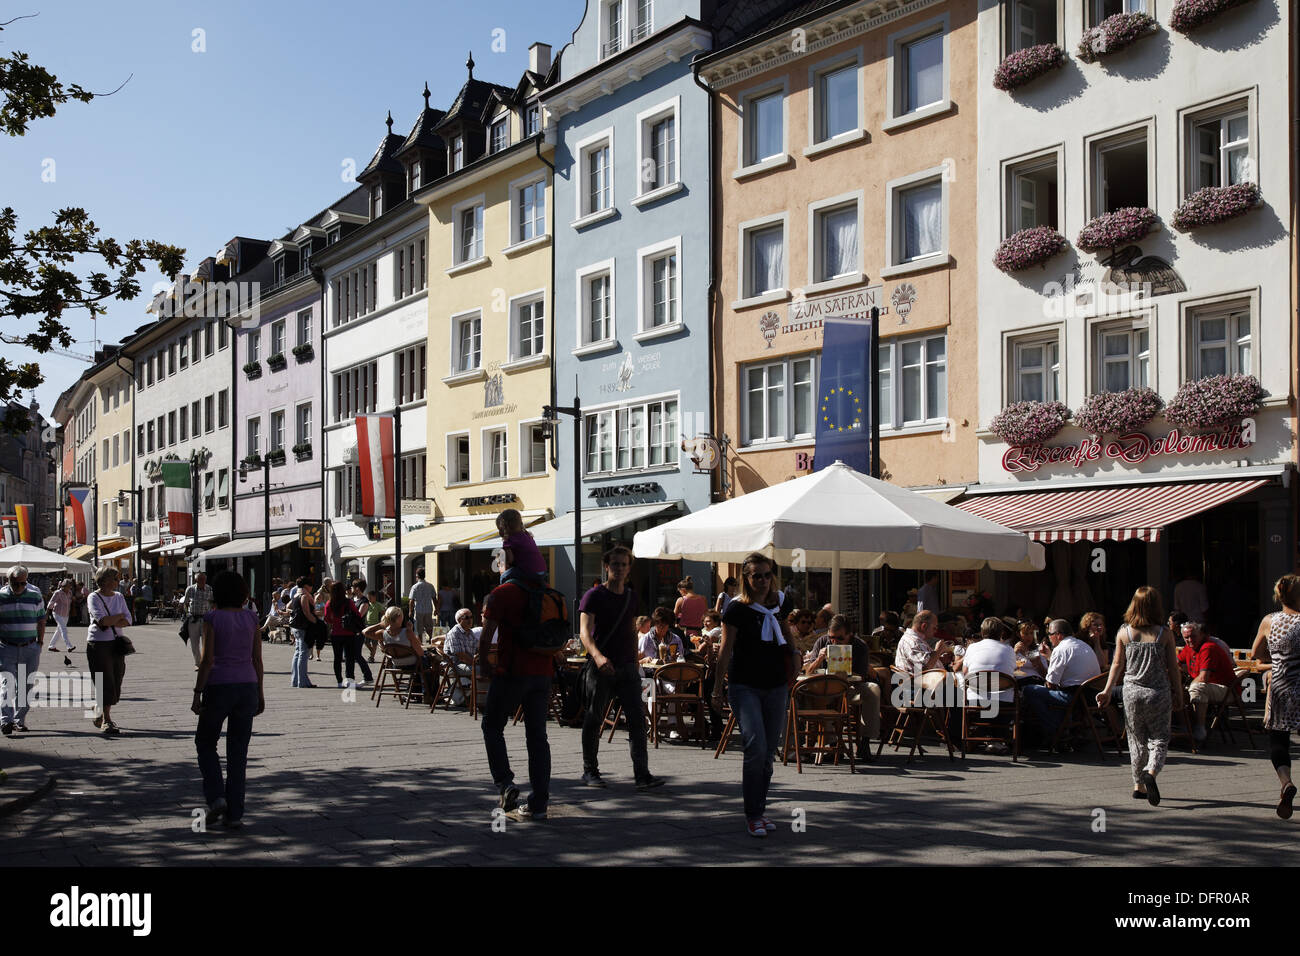 Germany, Baden-Wurttemberg, Lake of Constance, Constance, People strolling along Kanzleistrasse, Stock Photo